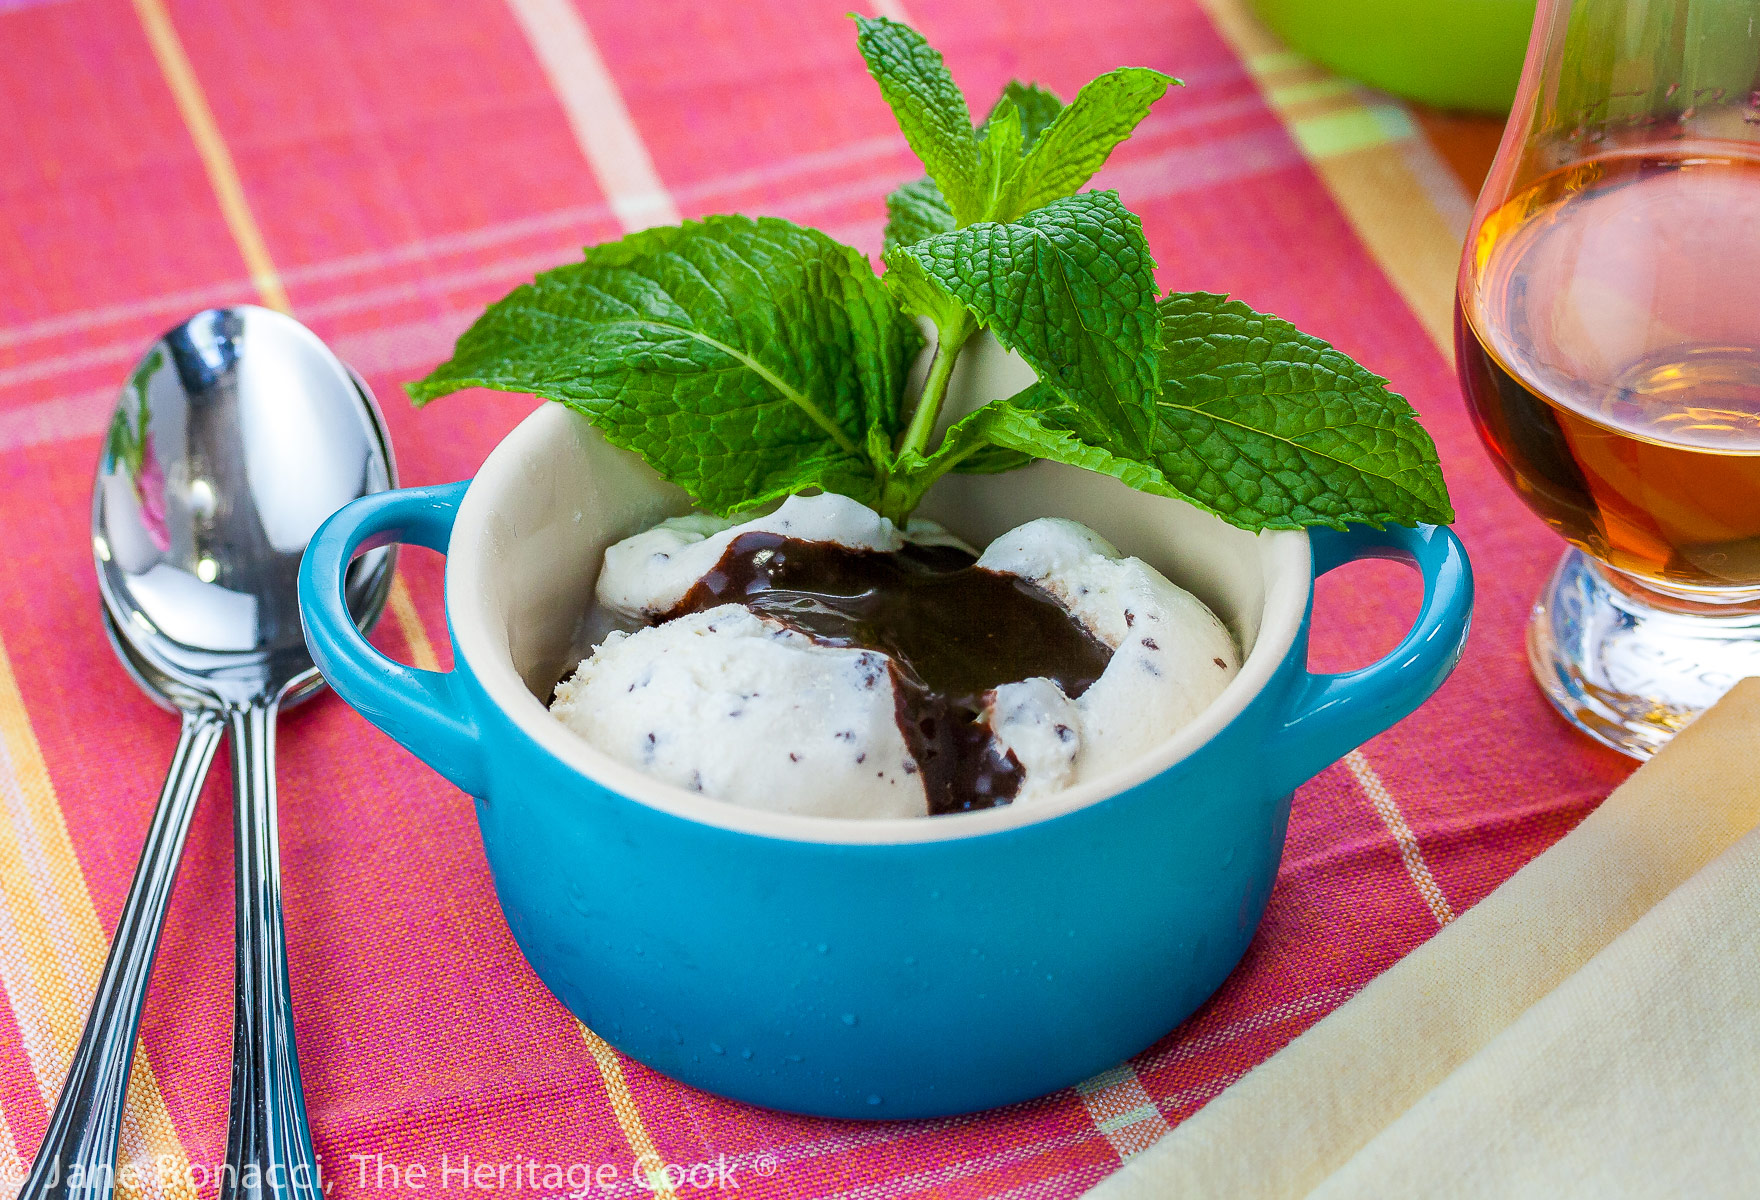 Ice cream in blue and green bowls topped with the chocolate sauce and a sprig of mint on a pink and orange cloth; Mint Julep Sundaes with Chocolate Bourbon Sauce (Gluten Free) © 2023 Jane Bonacci, The Heritage Cook. 